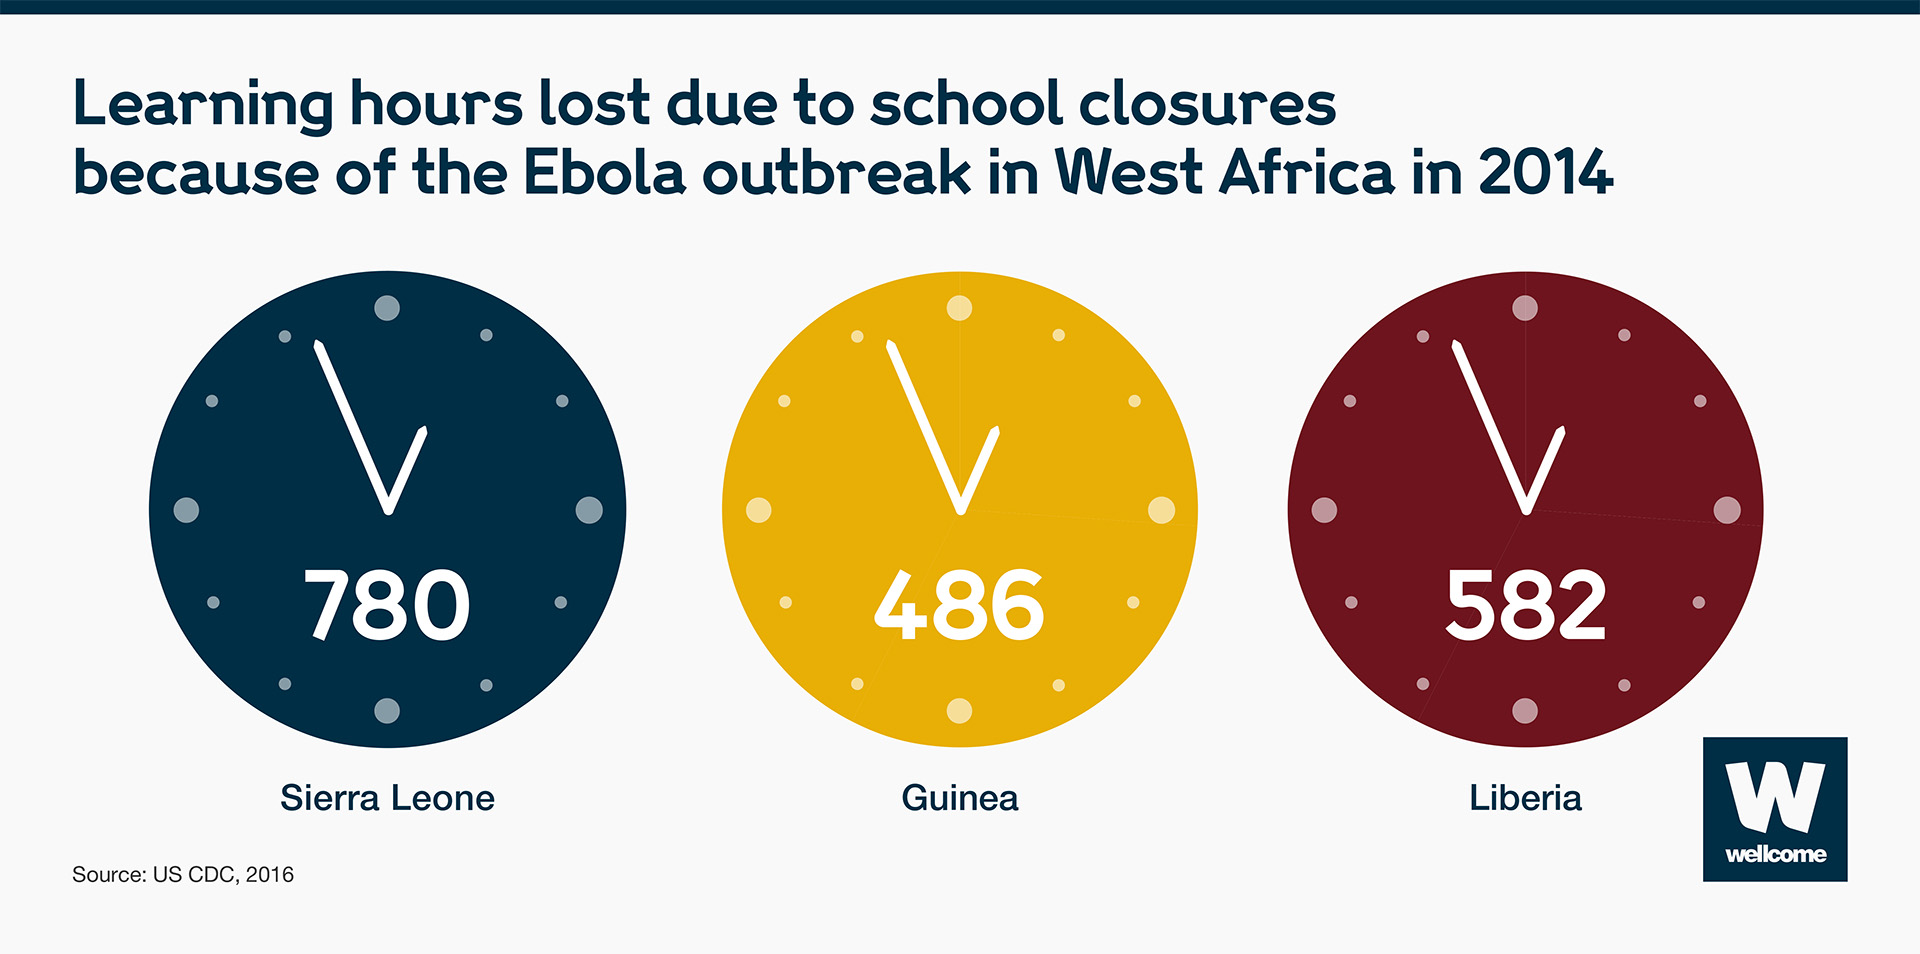 Three clocks to display the hours lost to education during the 2014 Ebola outbreak in West Africa